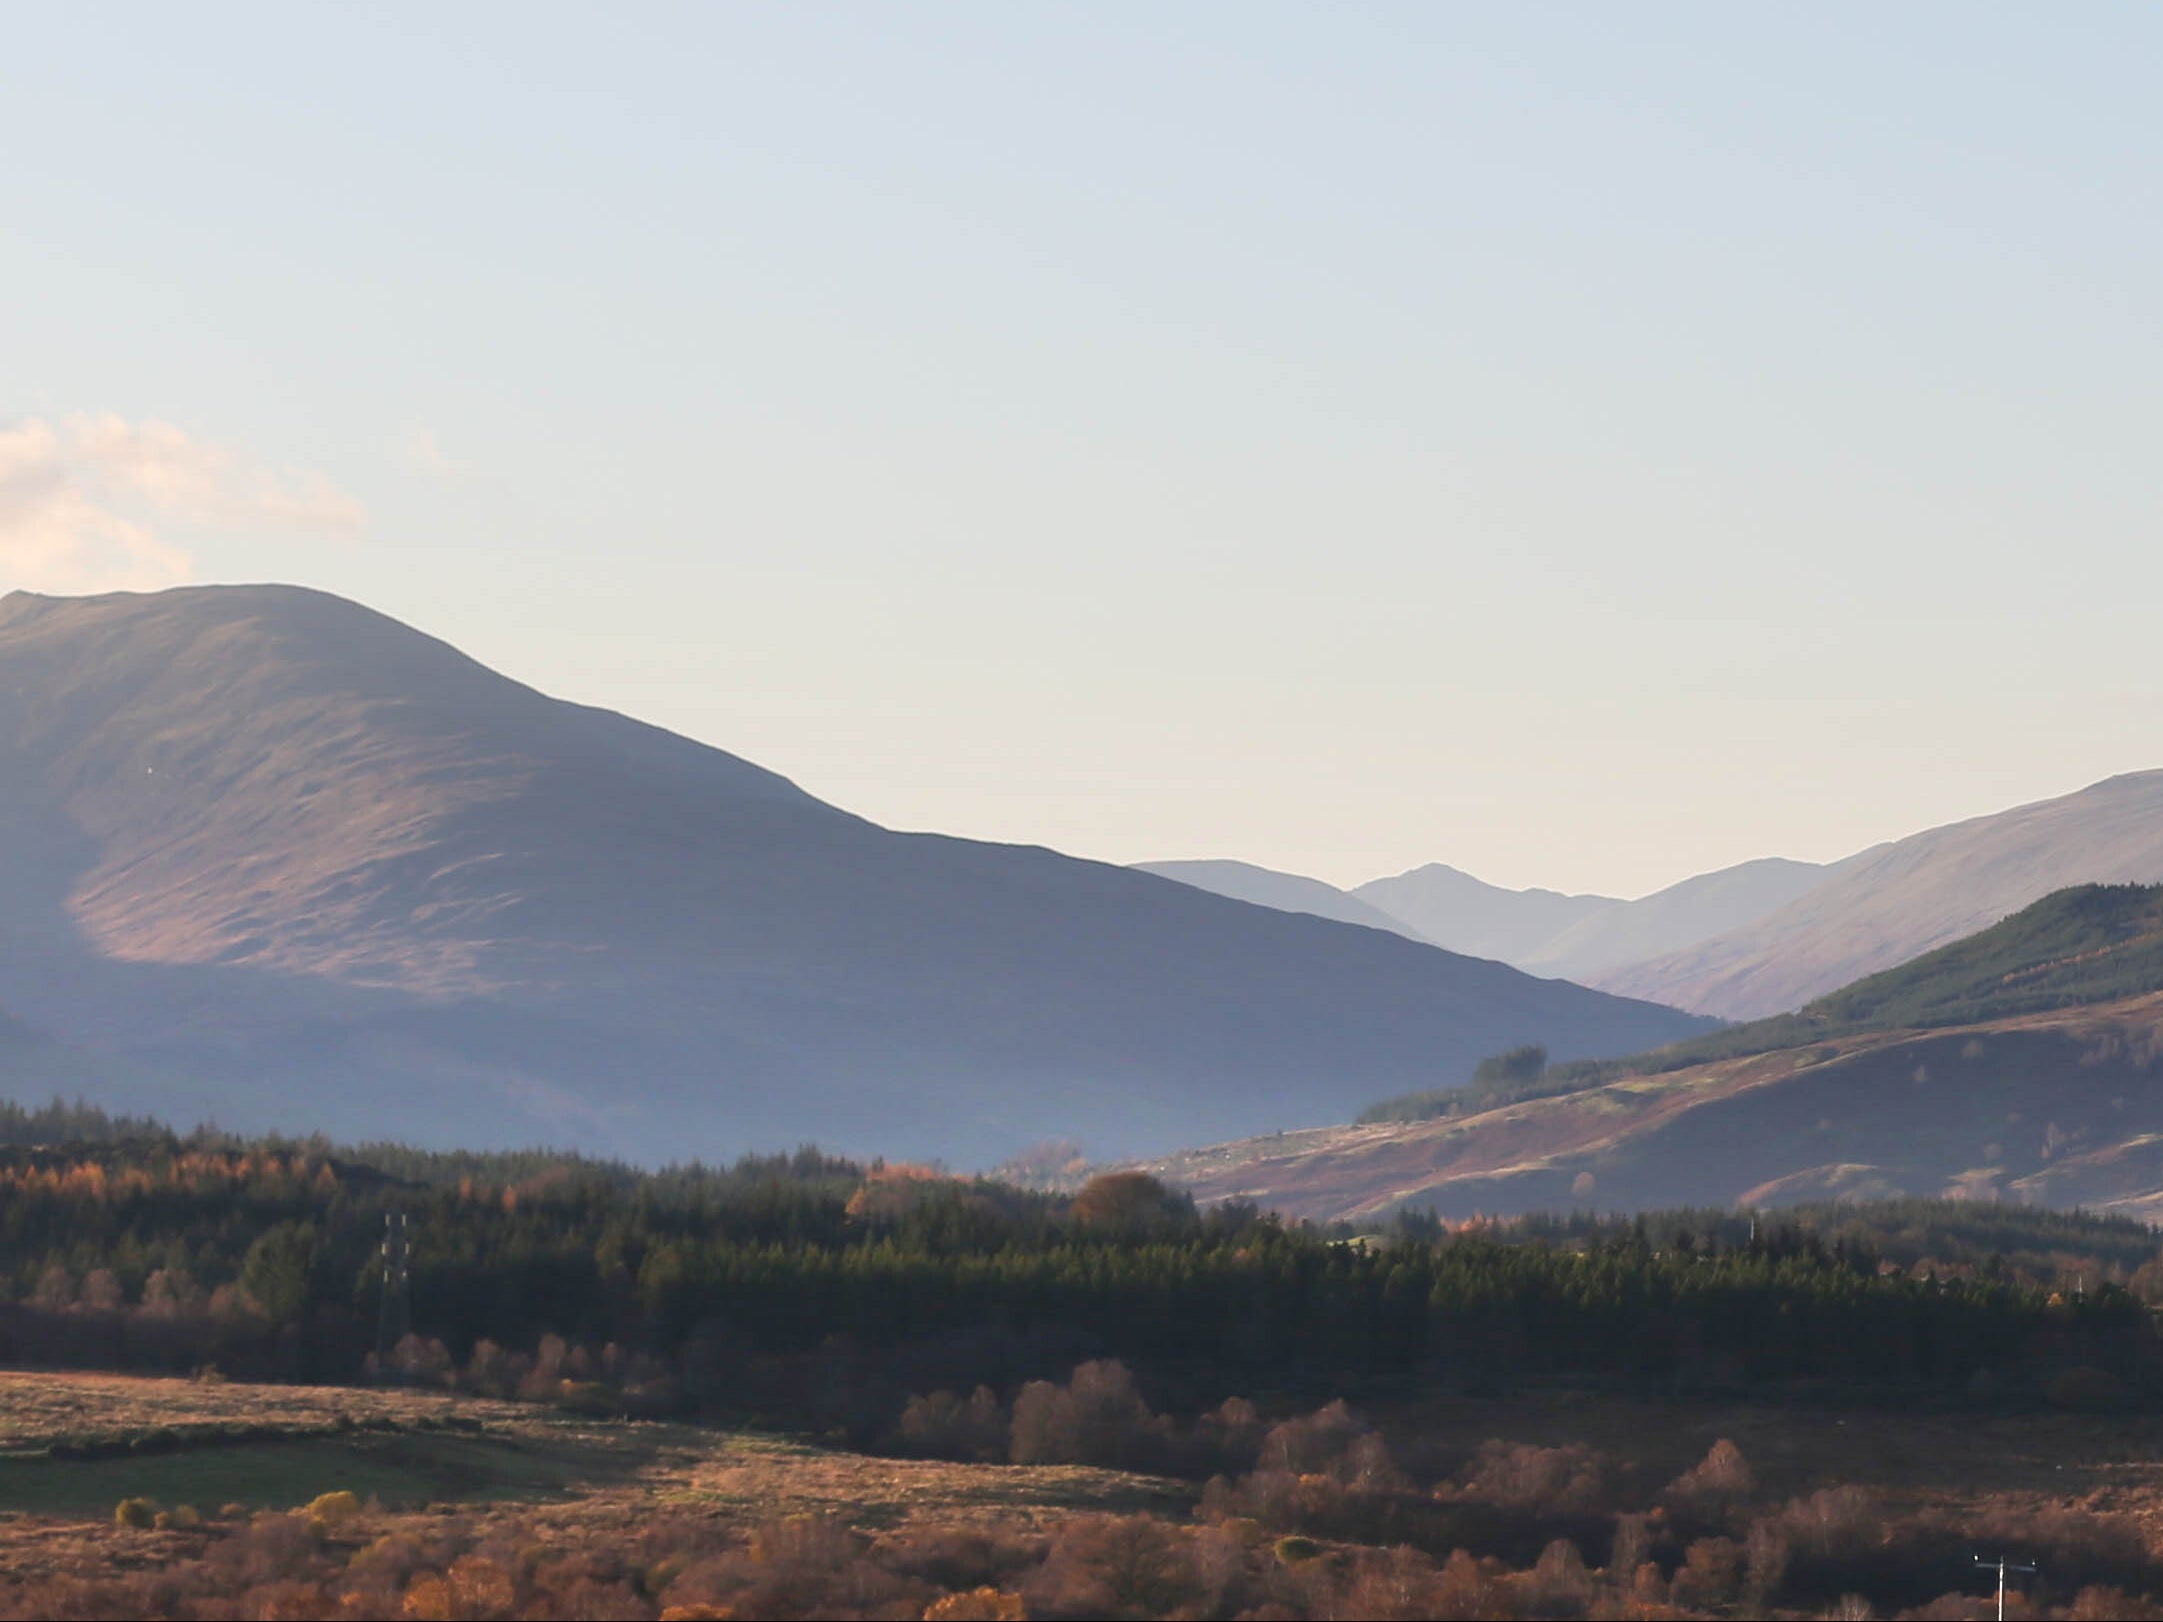 A series of tremors have been reported in the same area of the Scottish Highlands this week